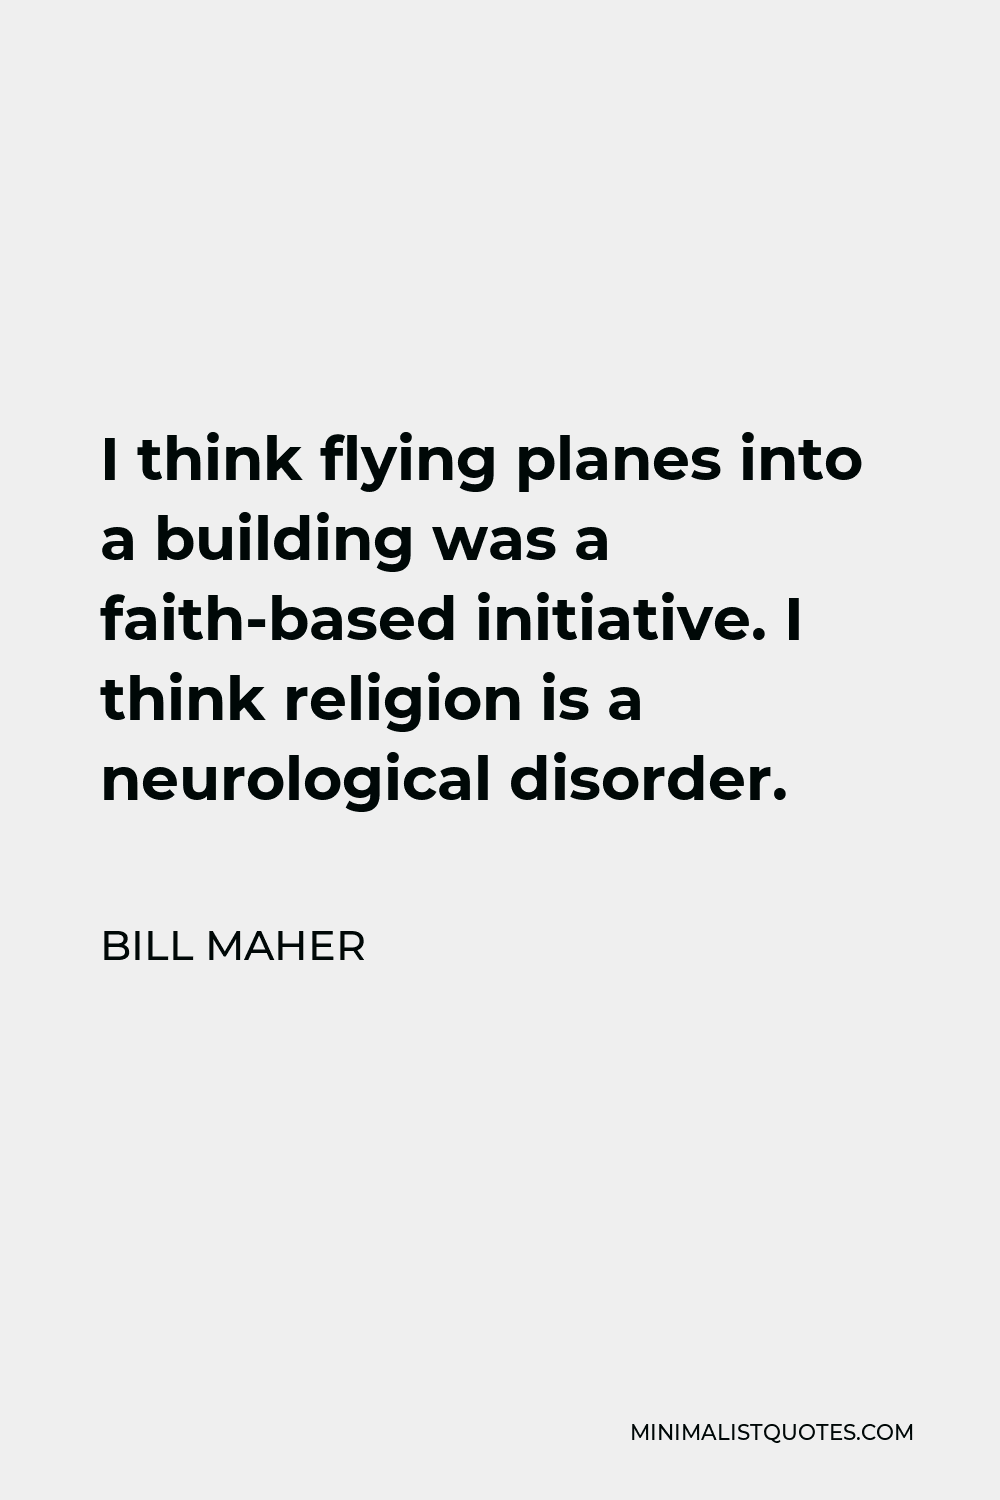 Bill Maher Quote - I think flying planes into a building was a faith-based initiative. I think religion is a neurological disorder.